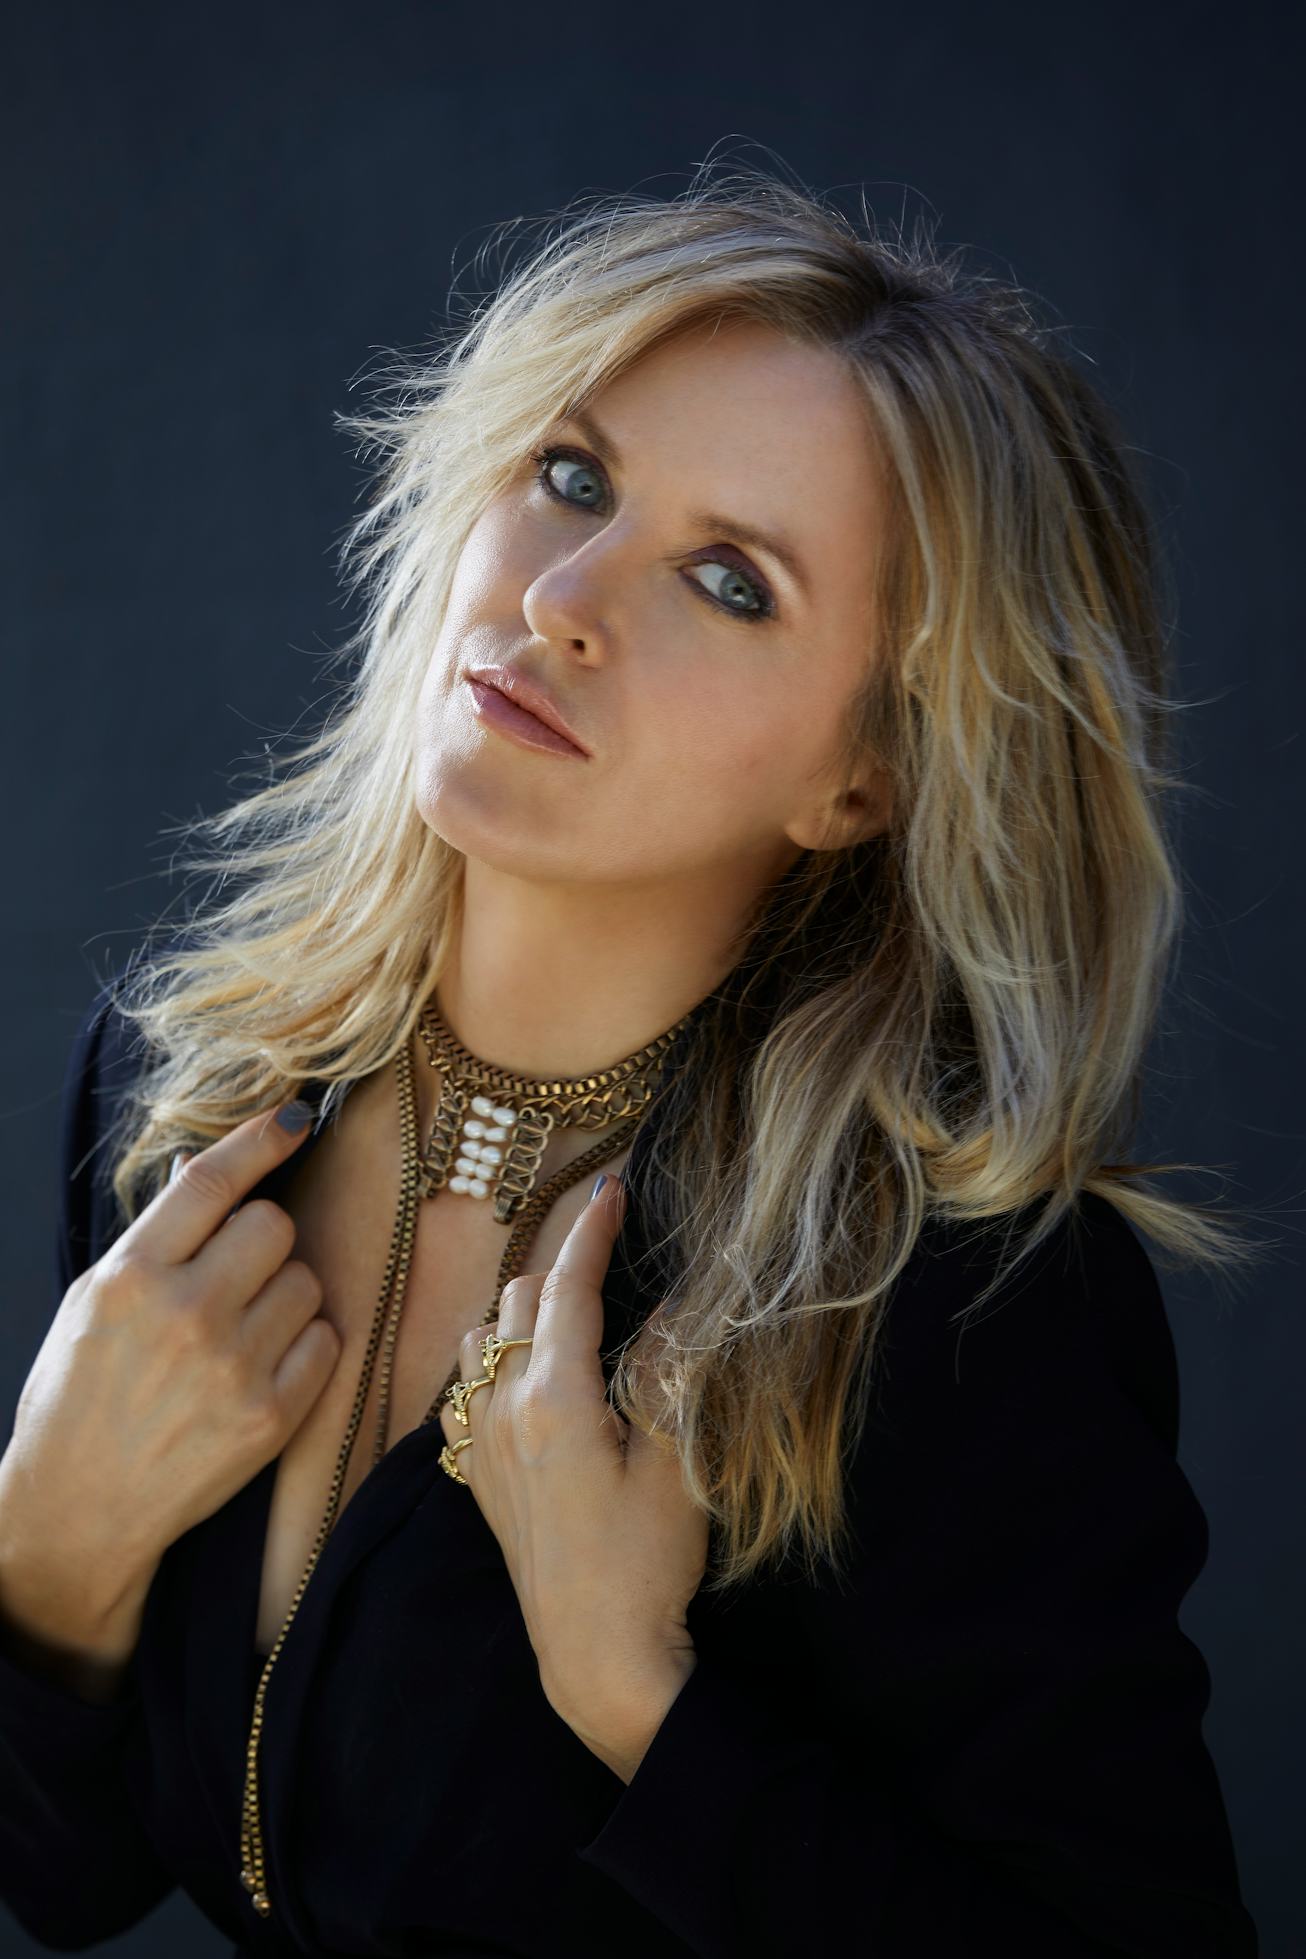 Liz Phair's first album in 11 years, 'Soberish,' is out now.